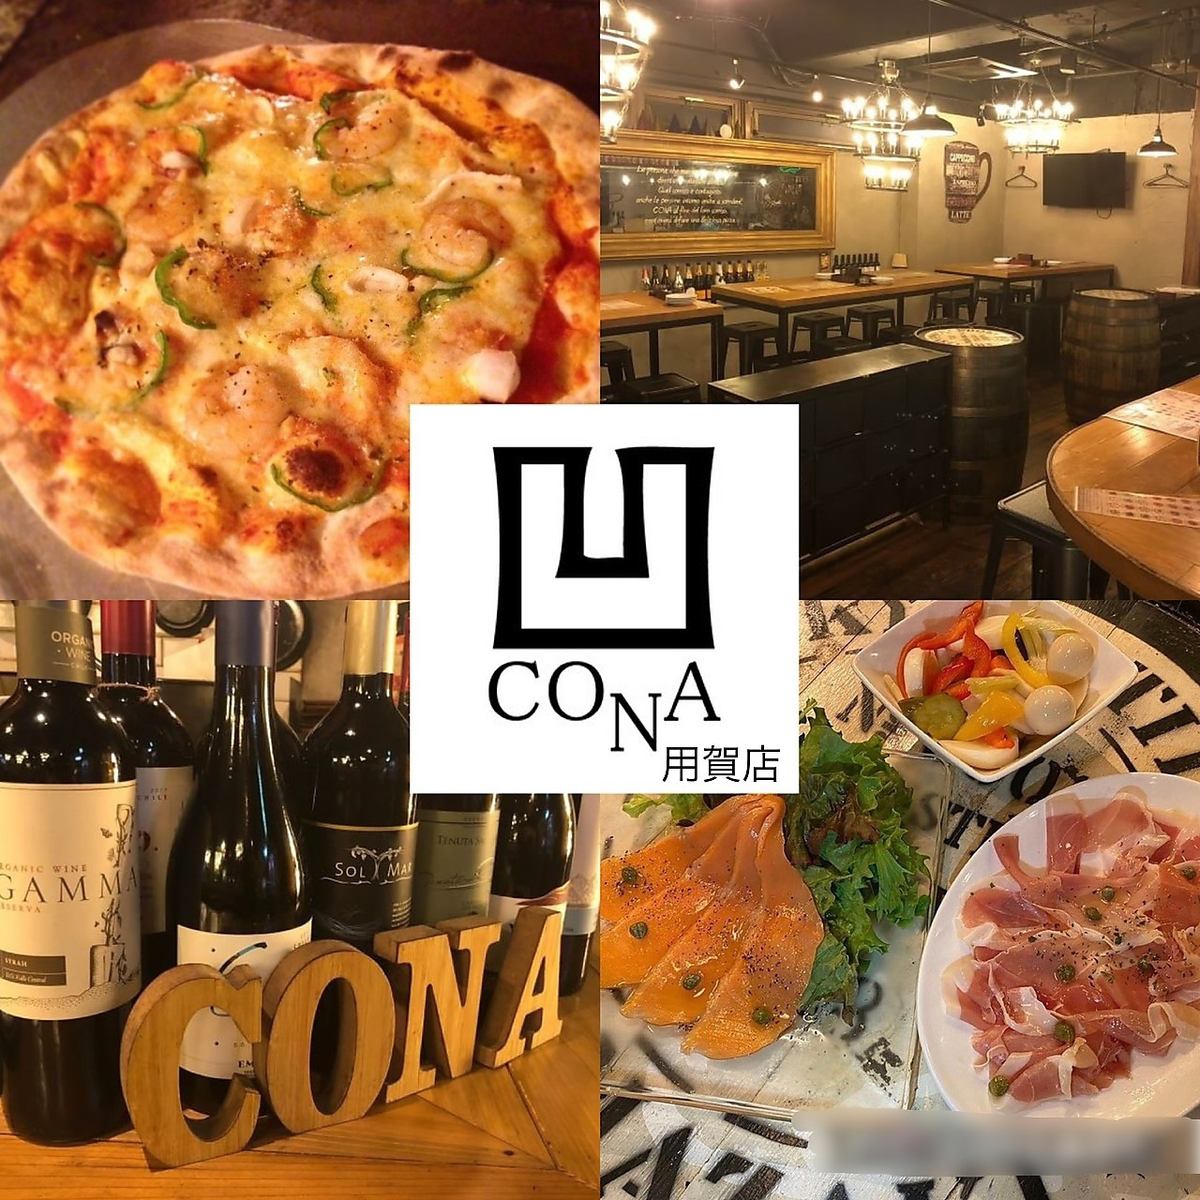 We offer more than 30 kinds of authentic pizzas baked in a kiln for 500 yen! Yoga gathering place "CONA" ♪